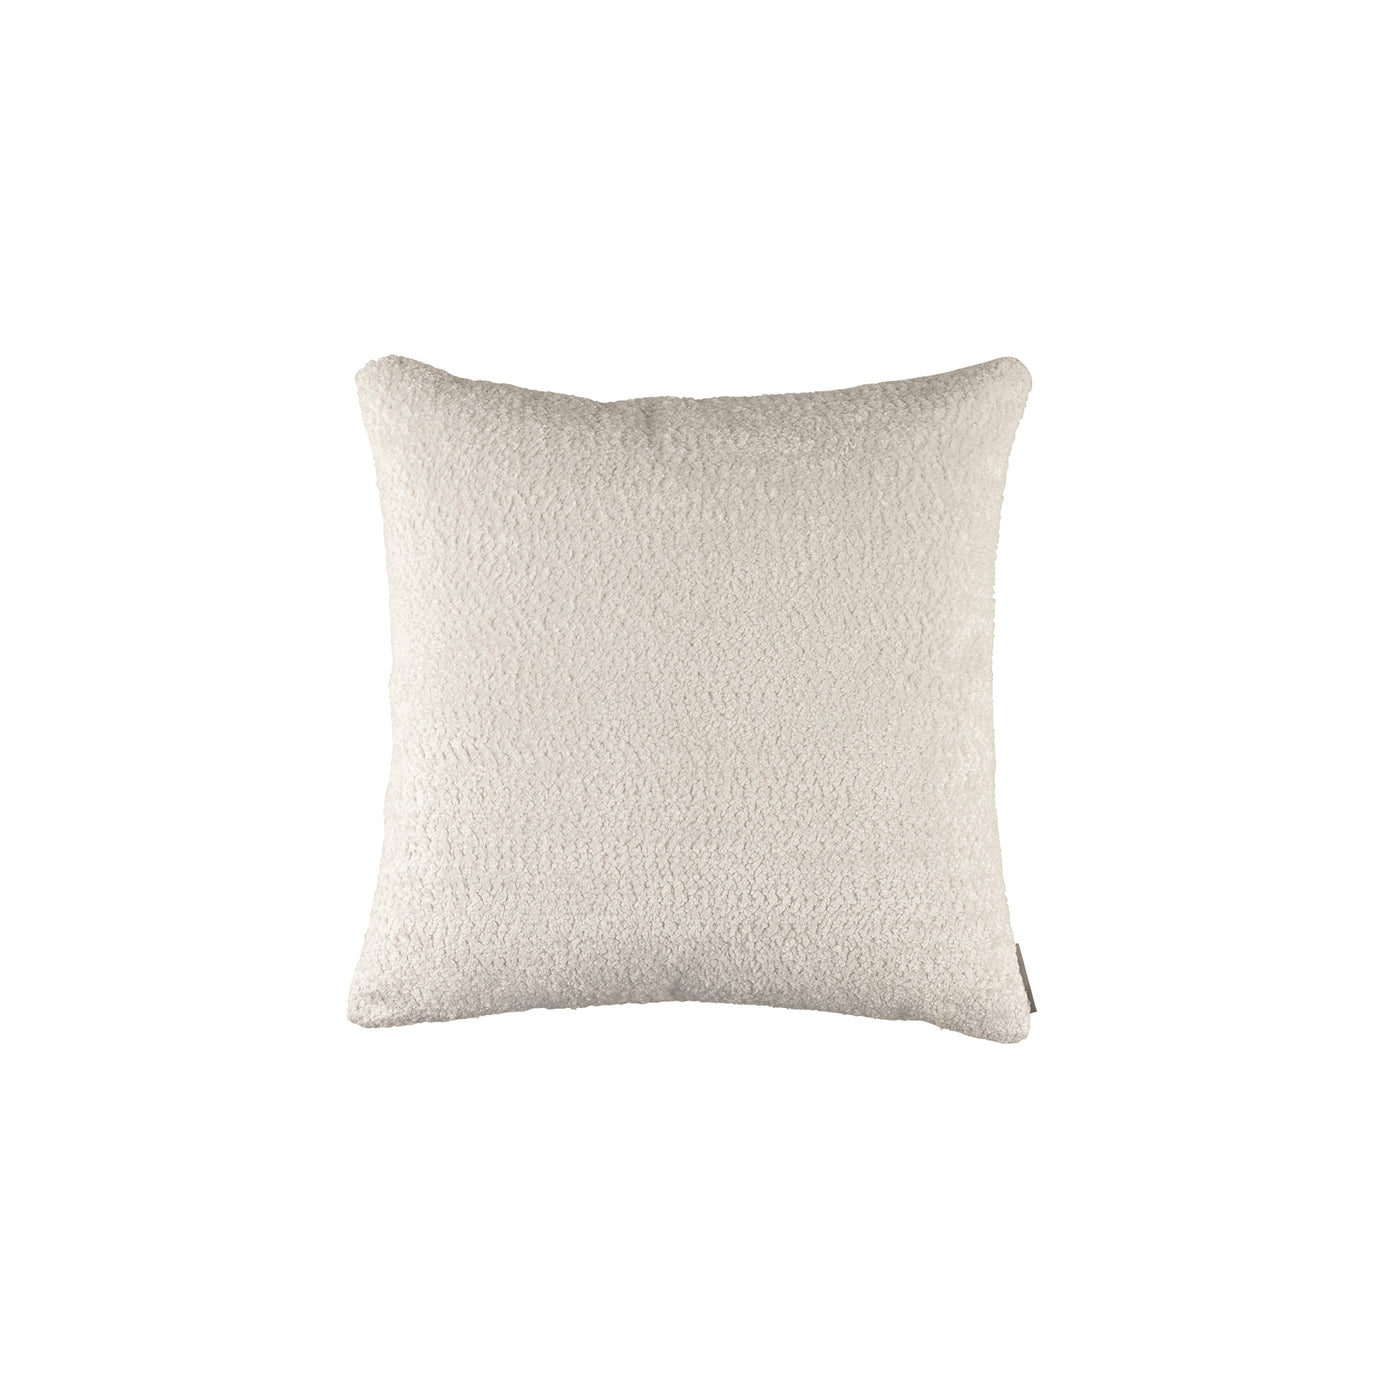 Zoey Oyster Euro Pillow (26x26)